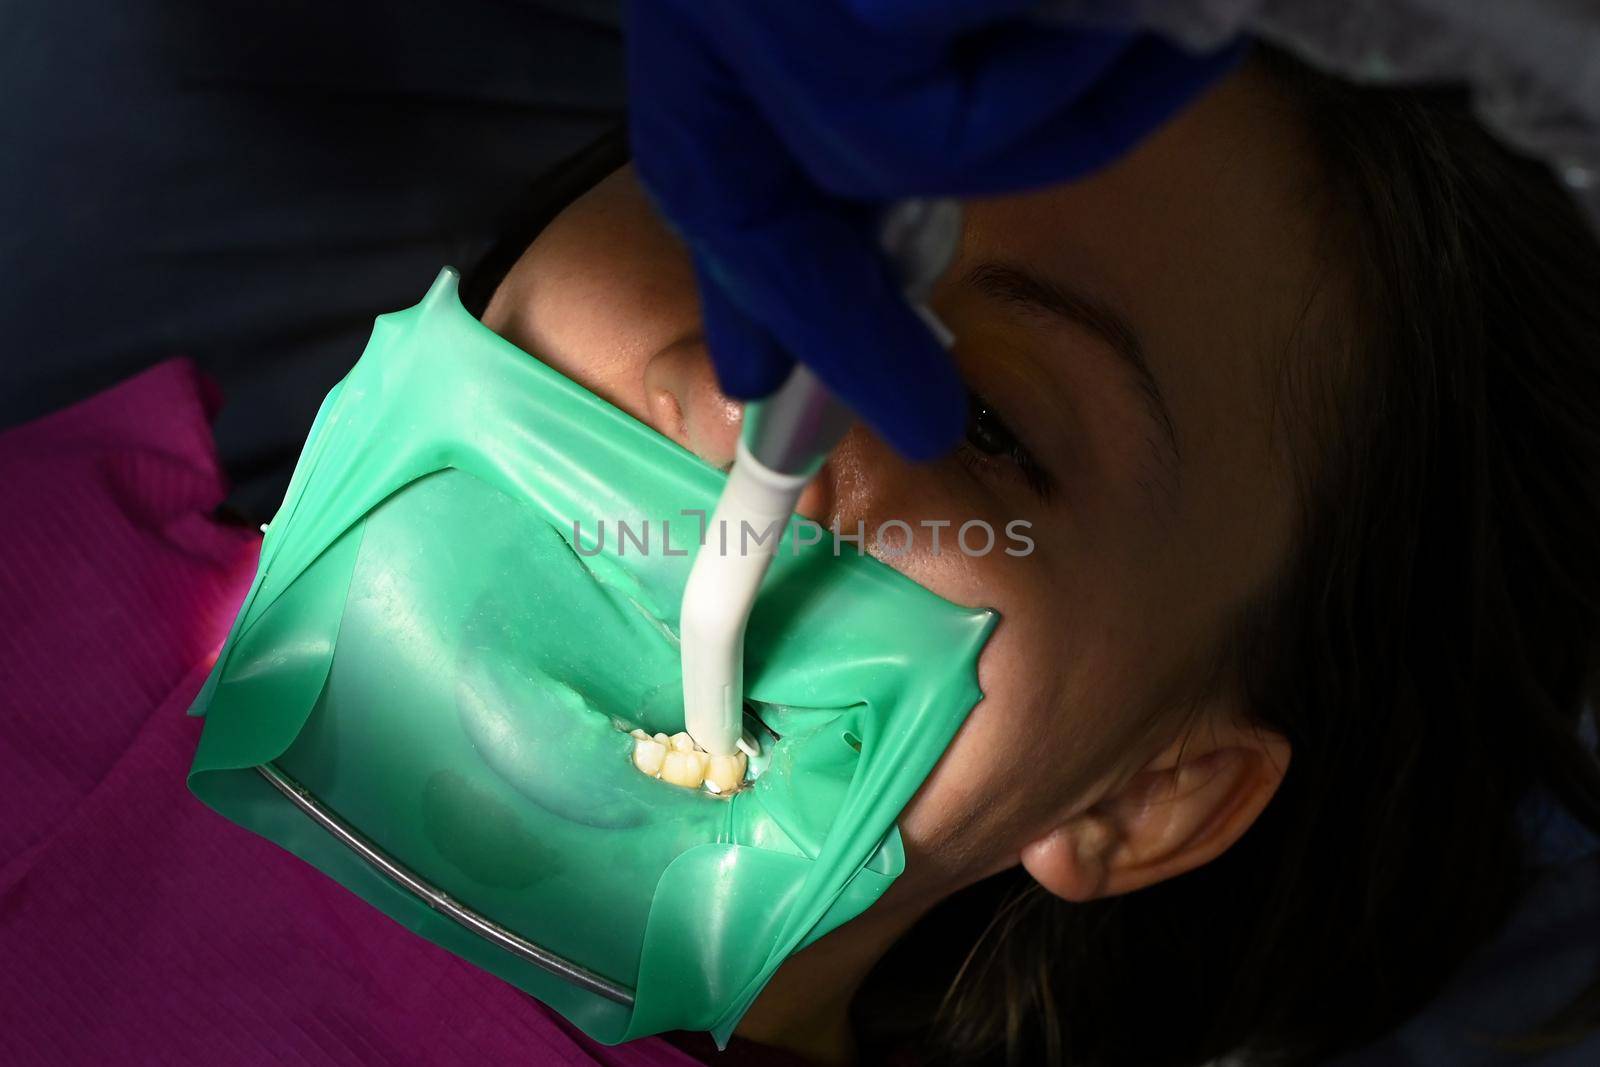 A woman at a dentist's appointment, a dentist uses a rubber dam and dental tools for treatment.2020